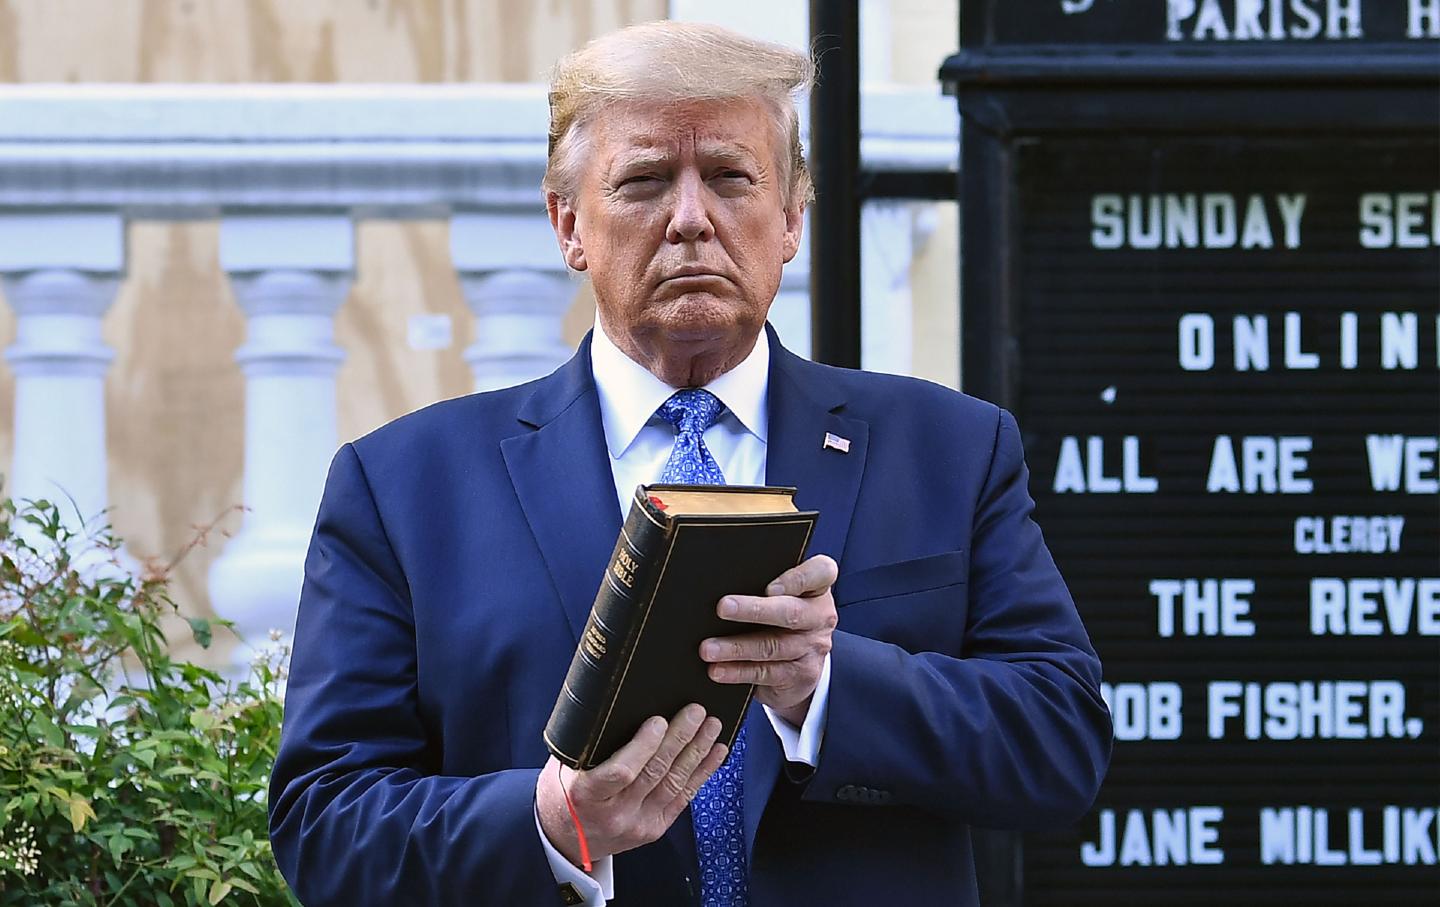 Then–US President Donald Trump holds a Bible outside of St. John's Episcopal church in Washington, D.C., on June 1, 2020. Trump was due to make a televised address to the nation after days of protests against police brutality.